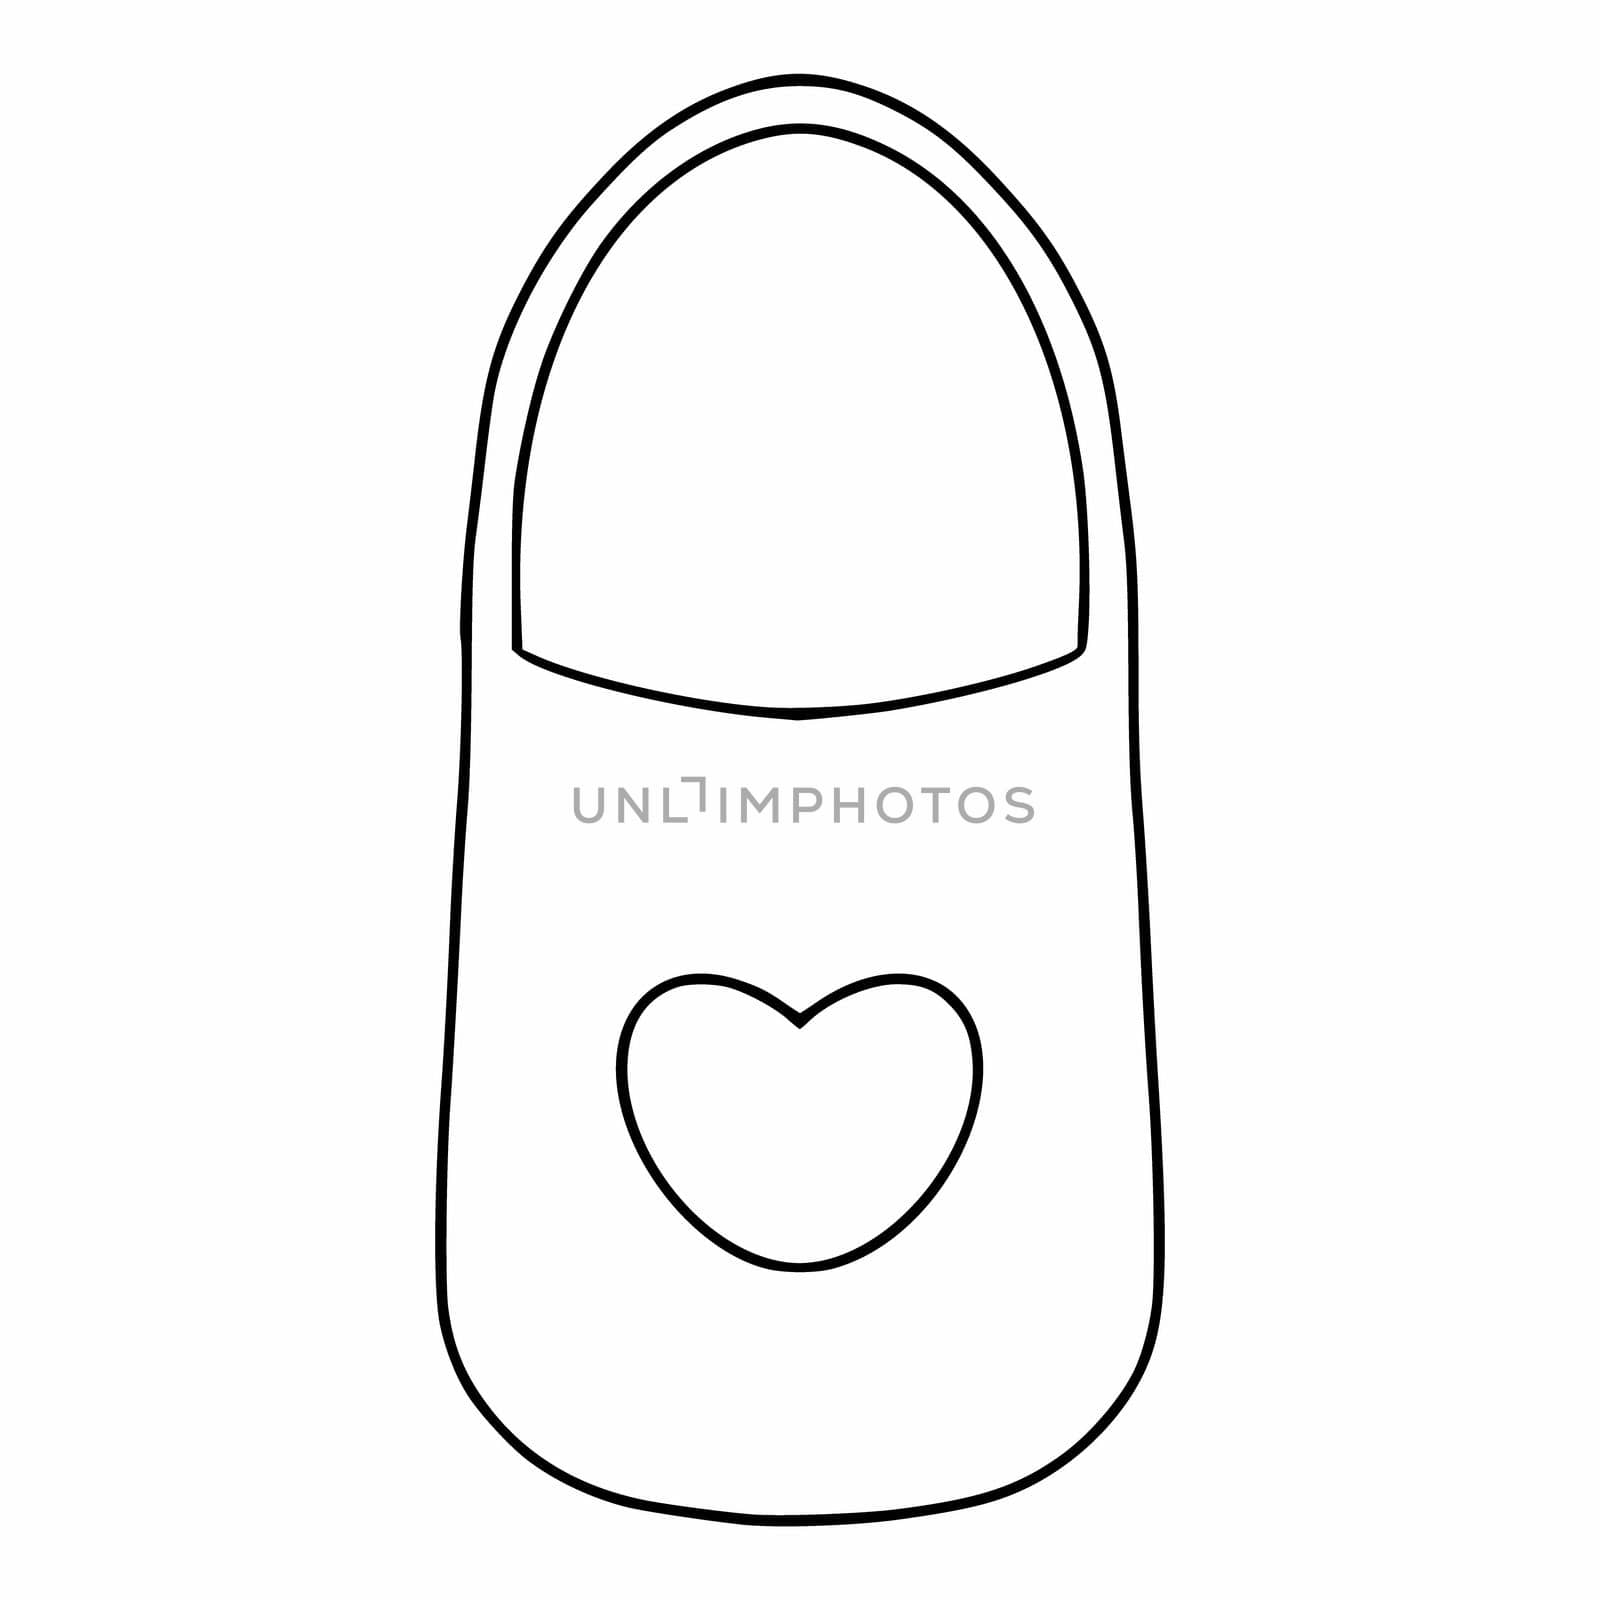 Bag for shopping and groceries. Environmental package for a trip to the store. Vector illustration in the doodle style.